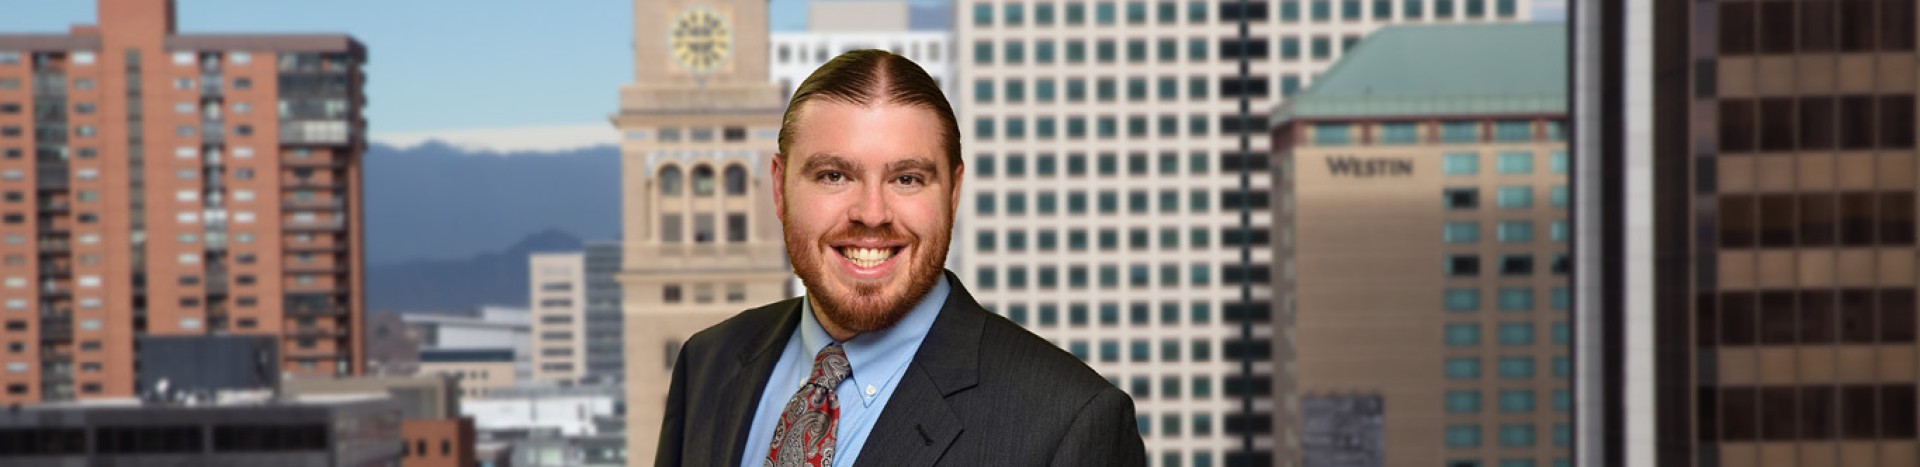 J. Kirk McGill is Special Counsel and the Hall Estill's appellate specialist. Kirk practices throughout the country in essentially all of the firm's practice areas.

